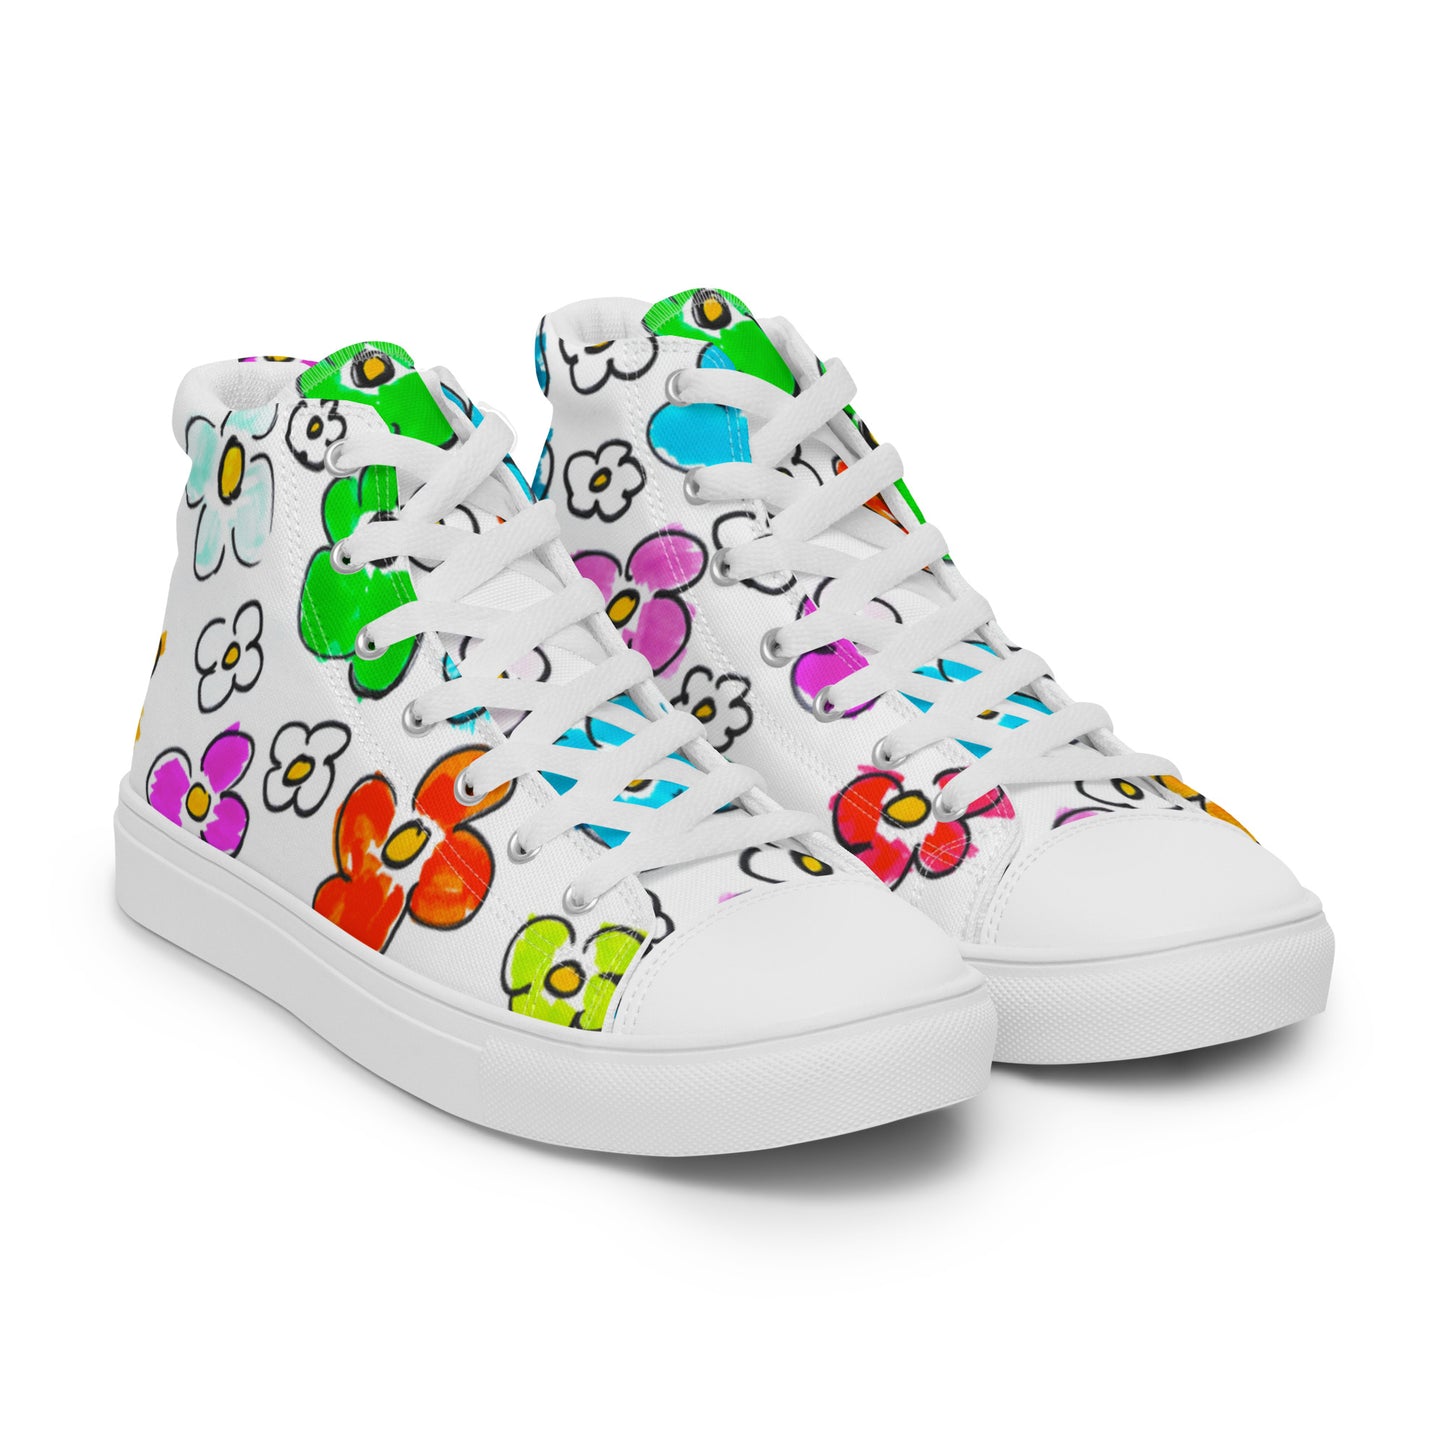 FLORE - Women's high-top canvas trainers